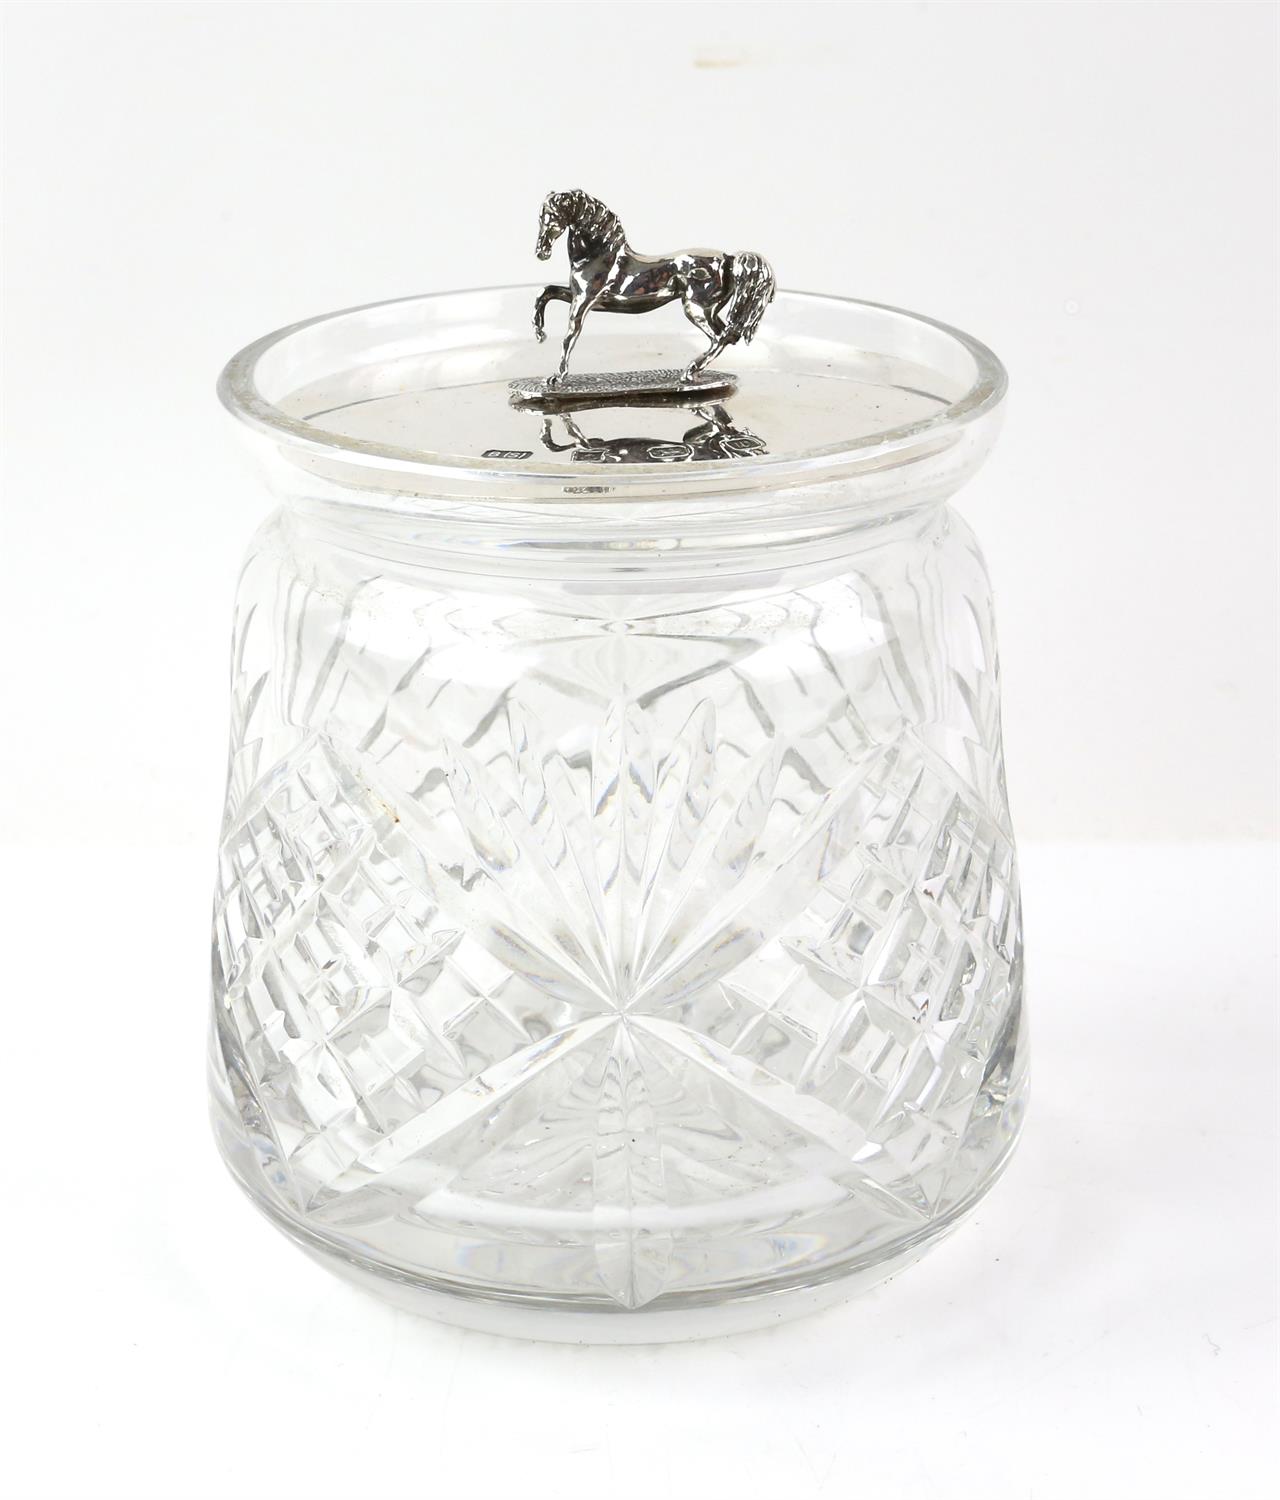 Silver topped biscuit barrel with horse form handle/finial by B.S Birmingham 1996 - Image 4 of 6